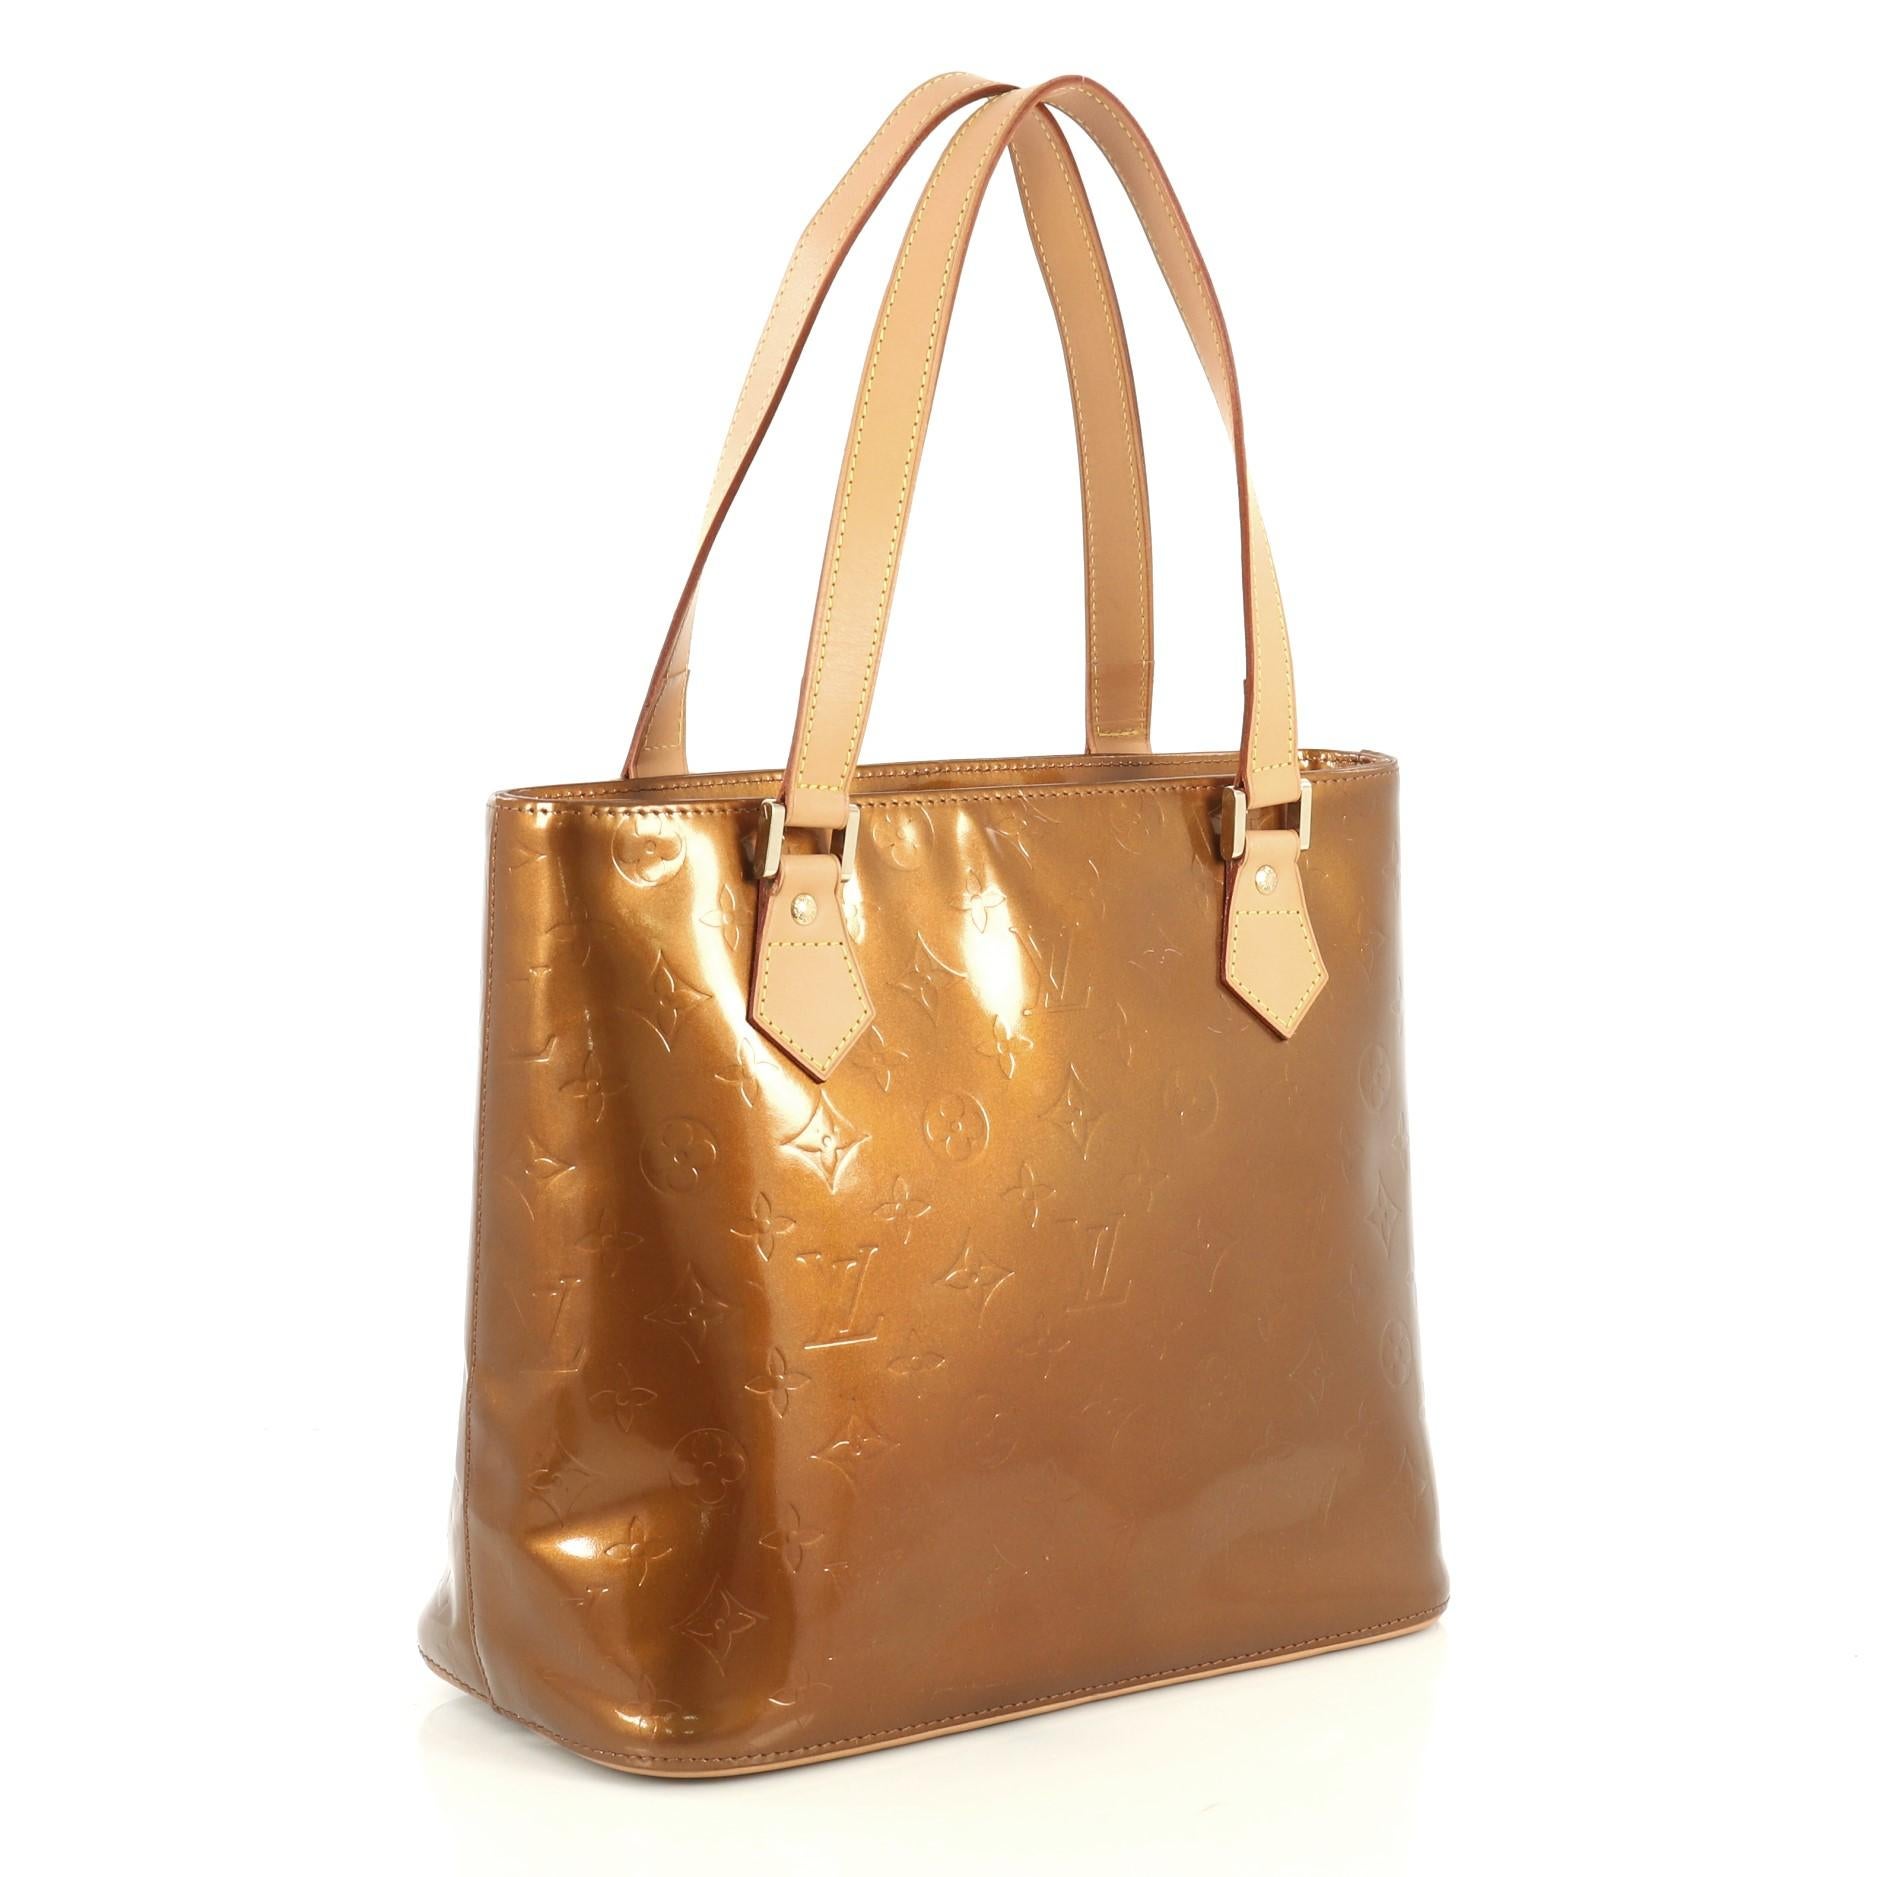 This Louis Vuitton Houston Handbag Monogram Vernis, crafted from brown monogram vernis leather, features dual flat vachetta leather handles, vachetta leather trim, and gold-tone hardware. Its zip closure opens to a brown leather interior with side